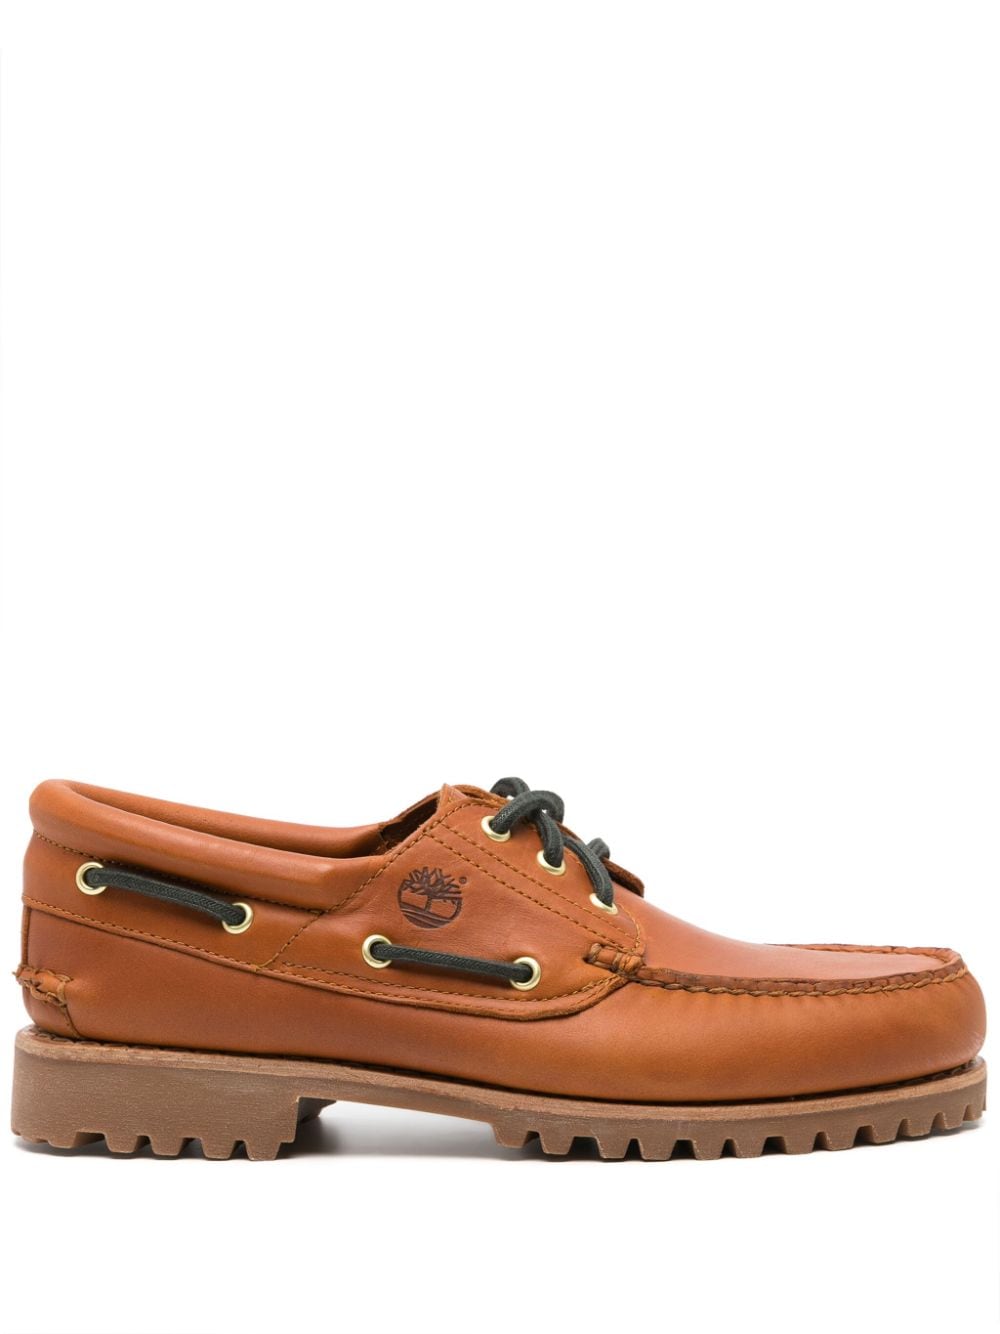 Timberland 3-Eye leather boat shoes - Brown von Timberland